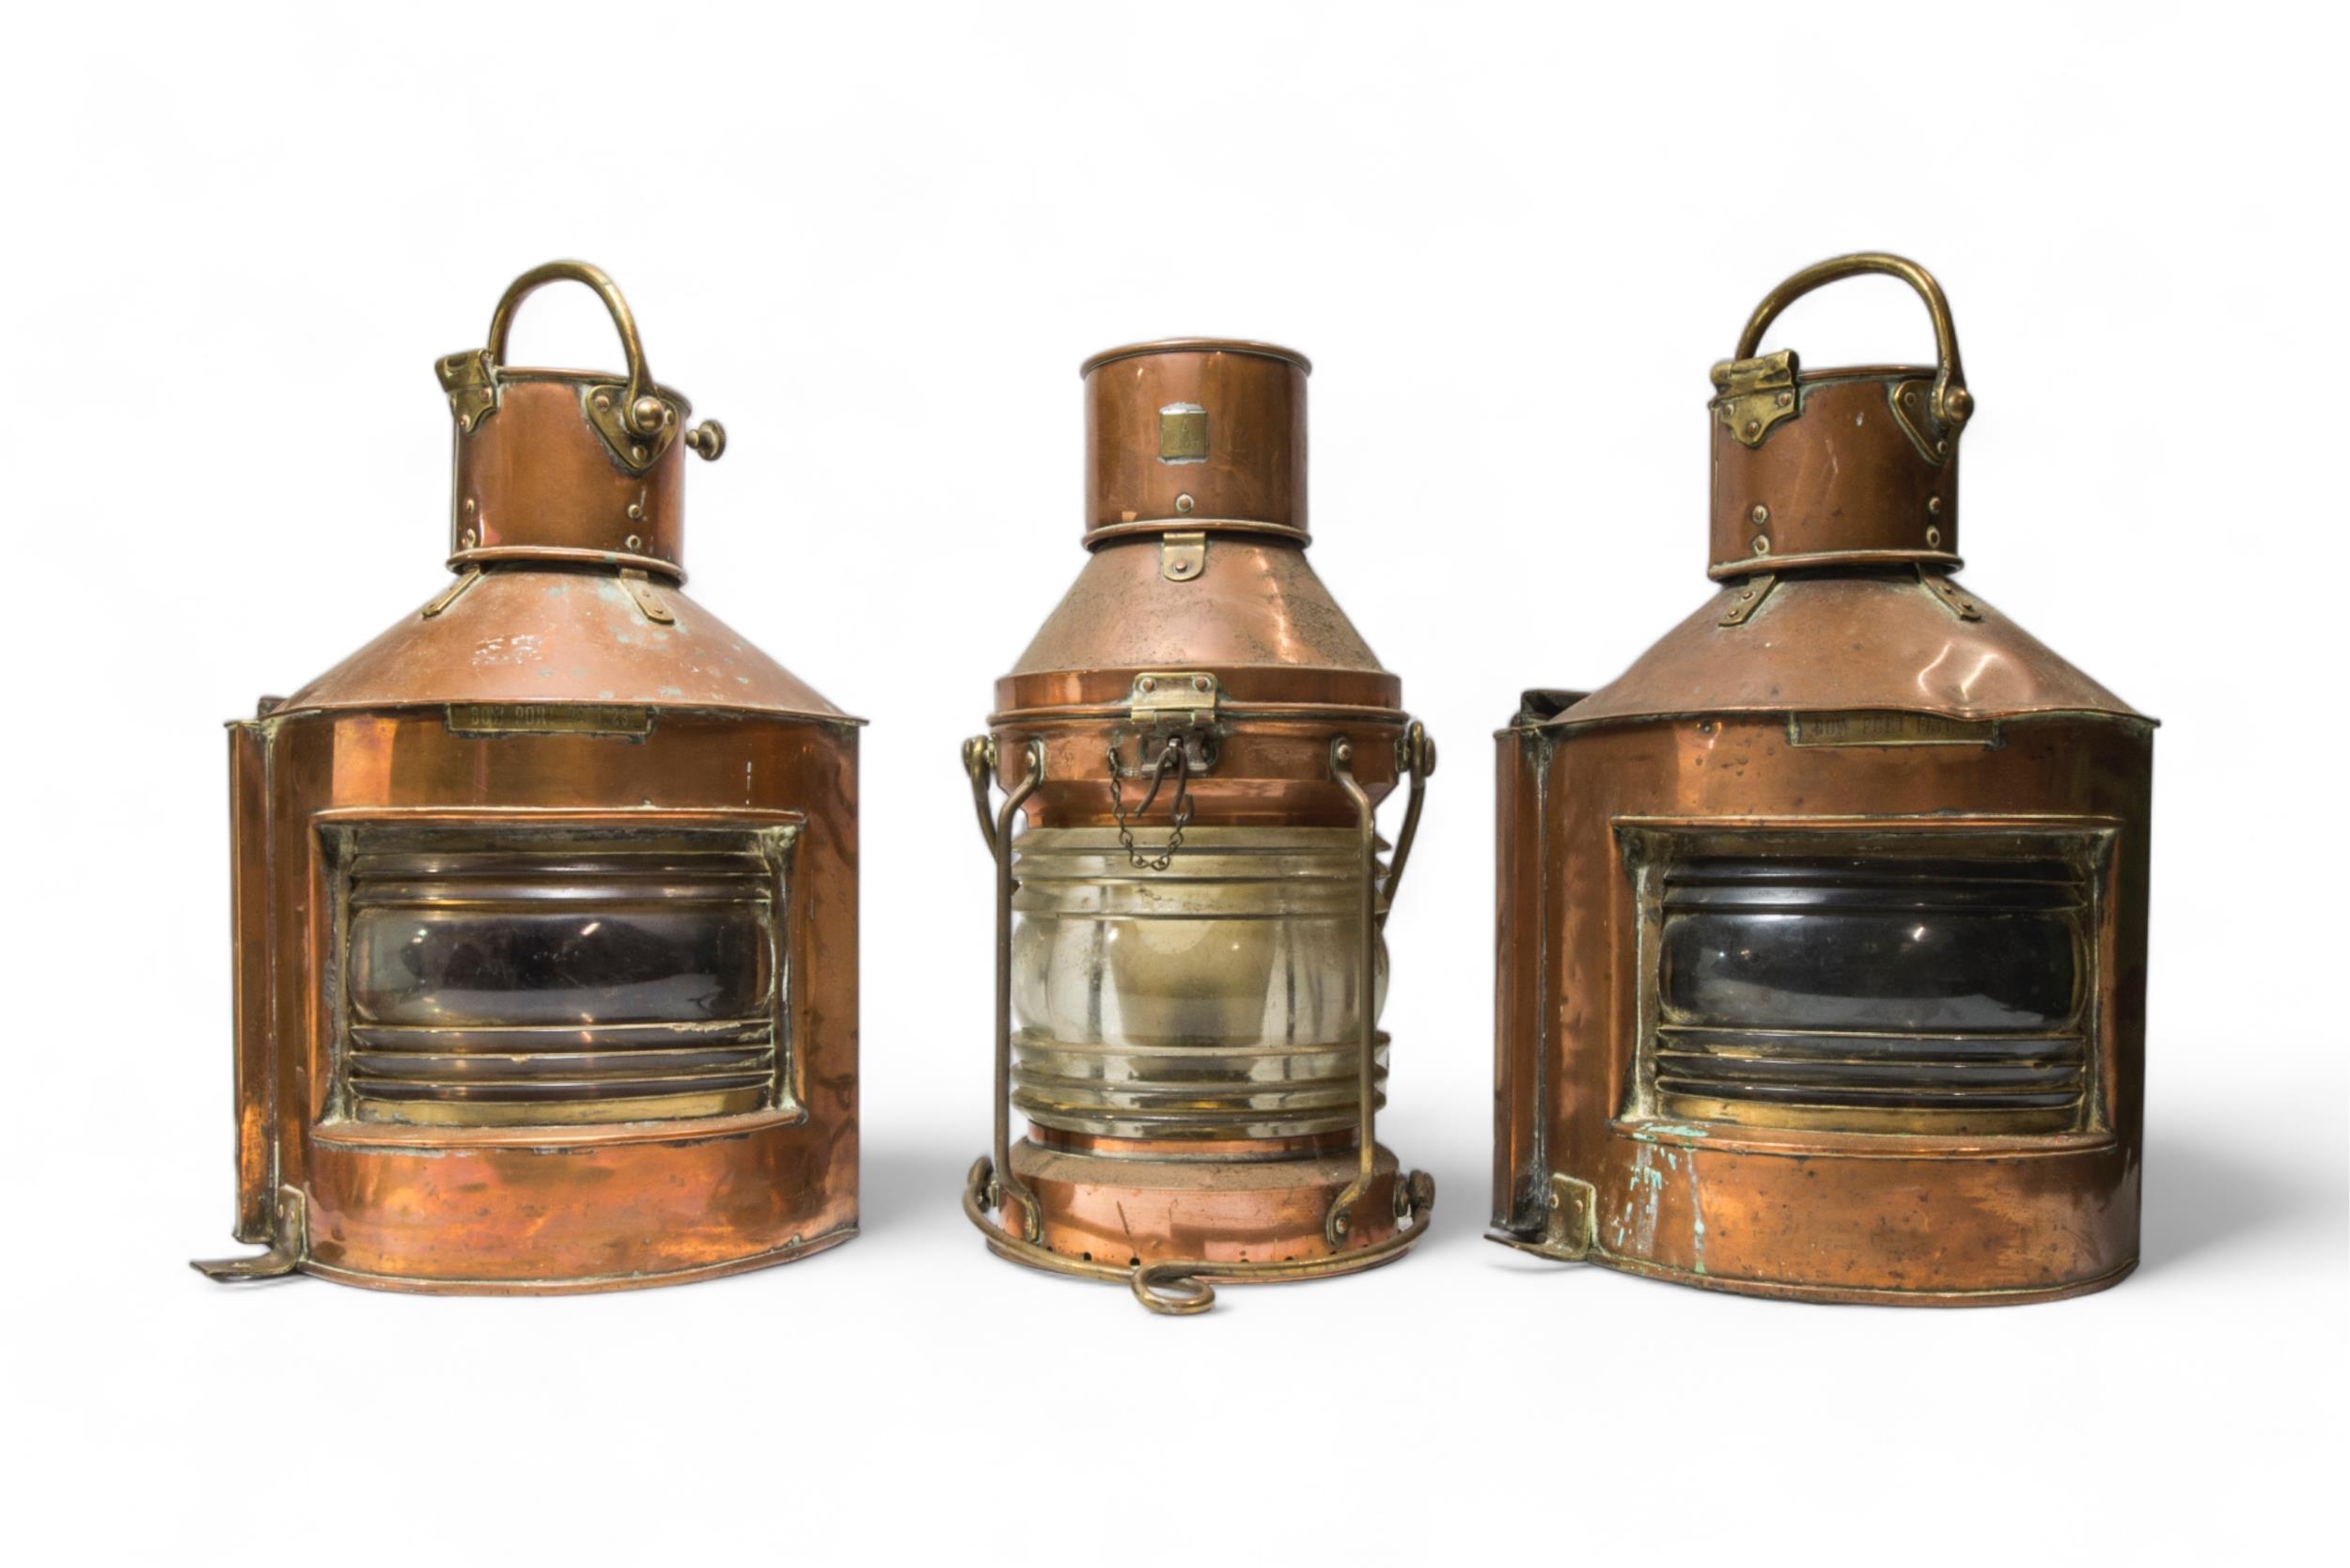 TWO MATCHING COPPER AND BRASS BOAT LANTERNS with plaques for ‘Bow Port Patt 23’ and makers stamped - Image 2 of 3